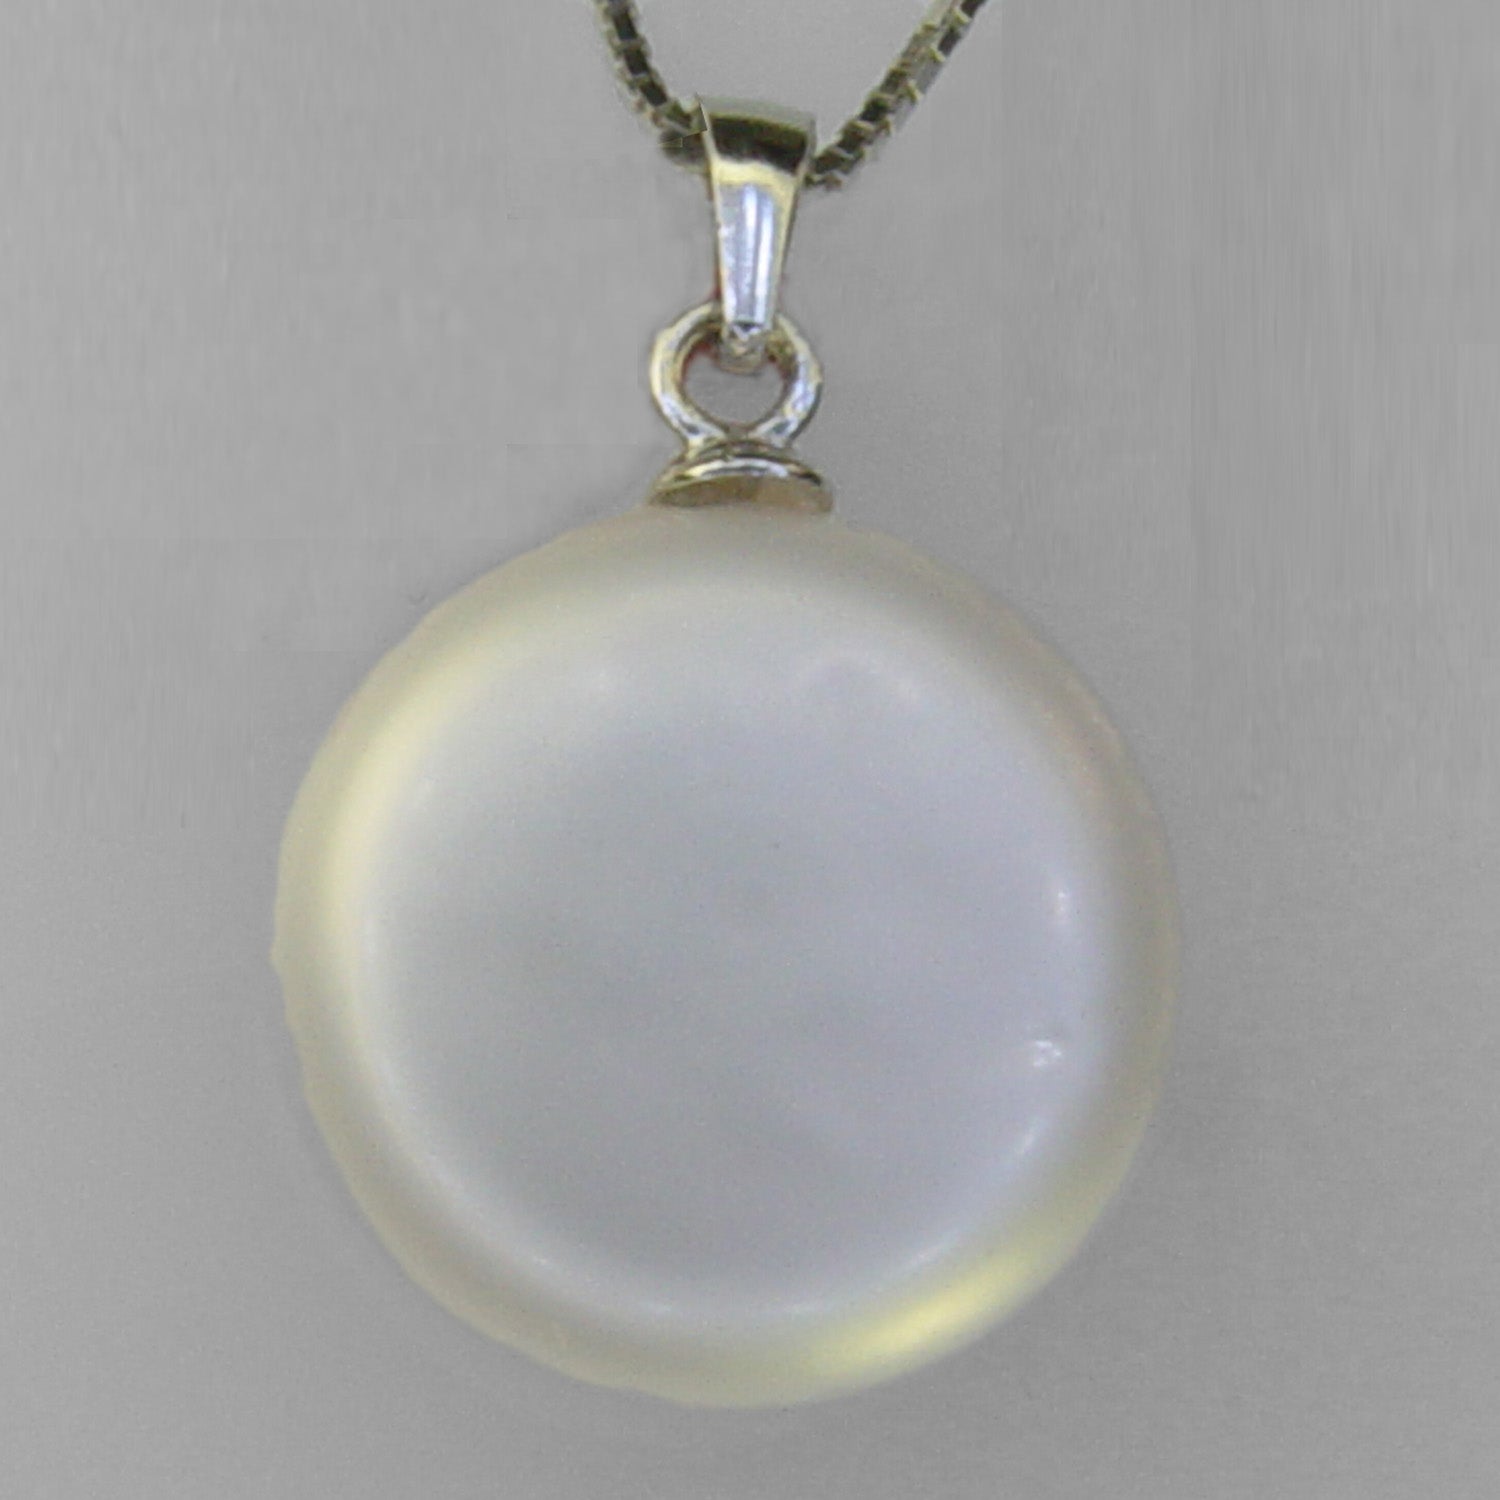 Pearl Pendant - 10ct 14mm Coin Pearl With Sterling Silver Bail